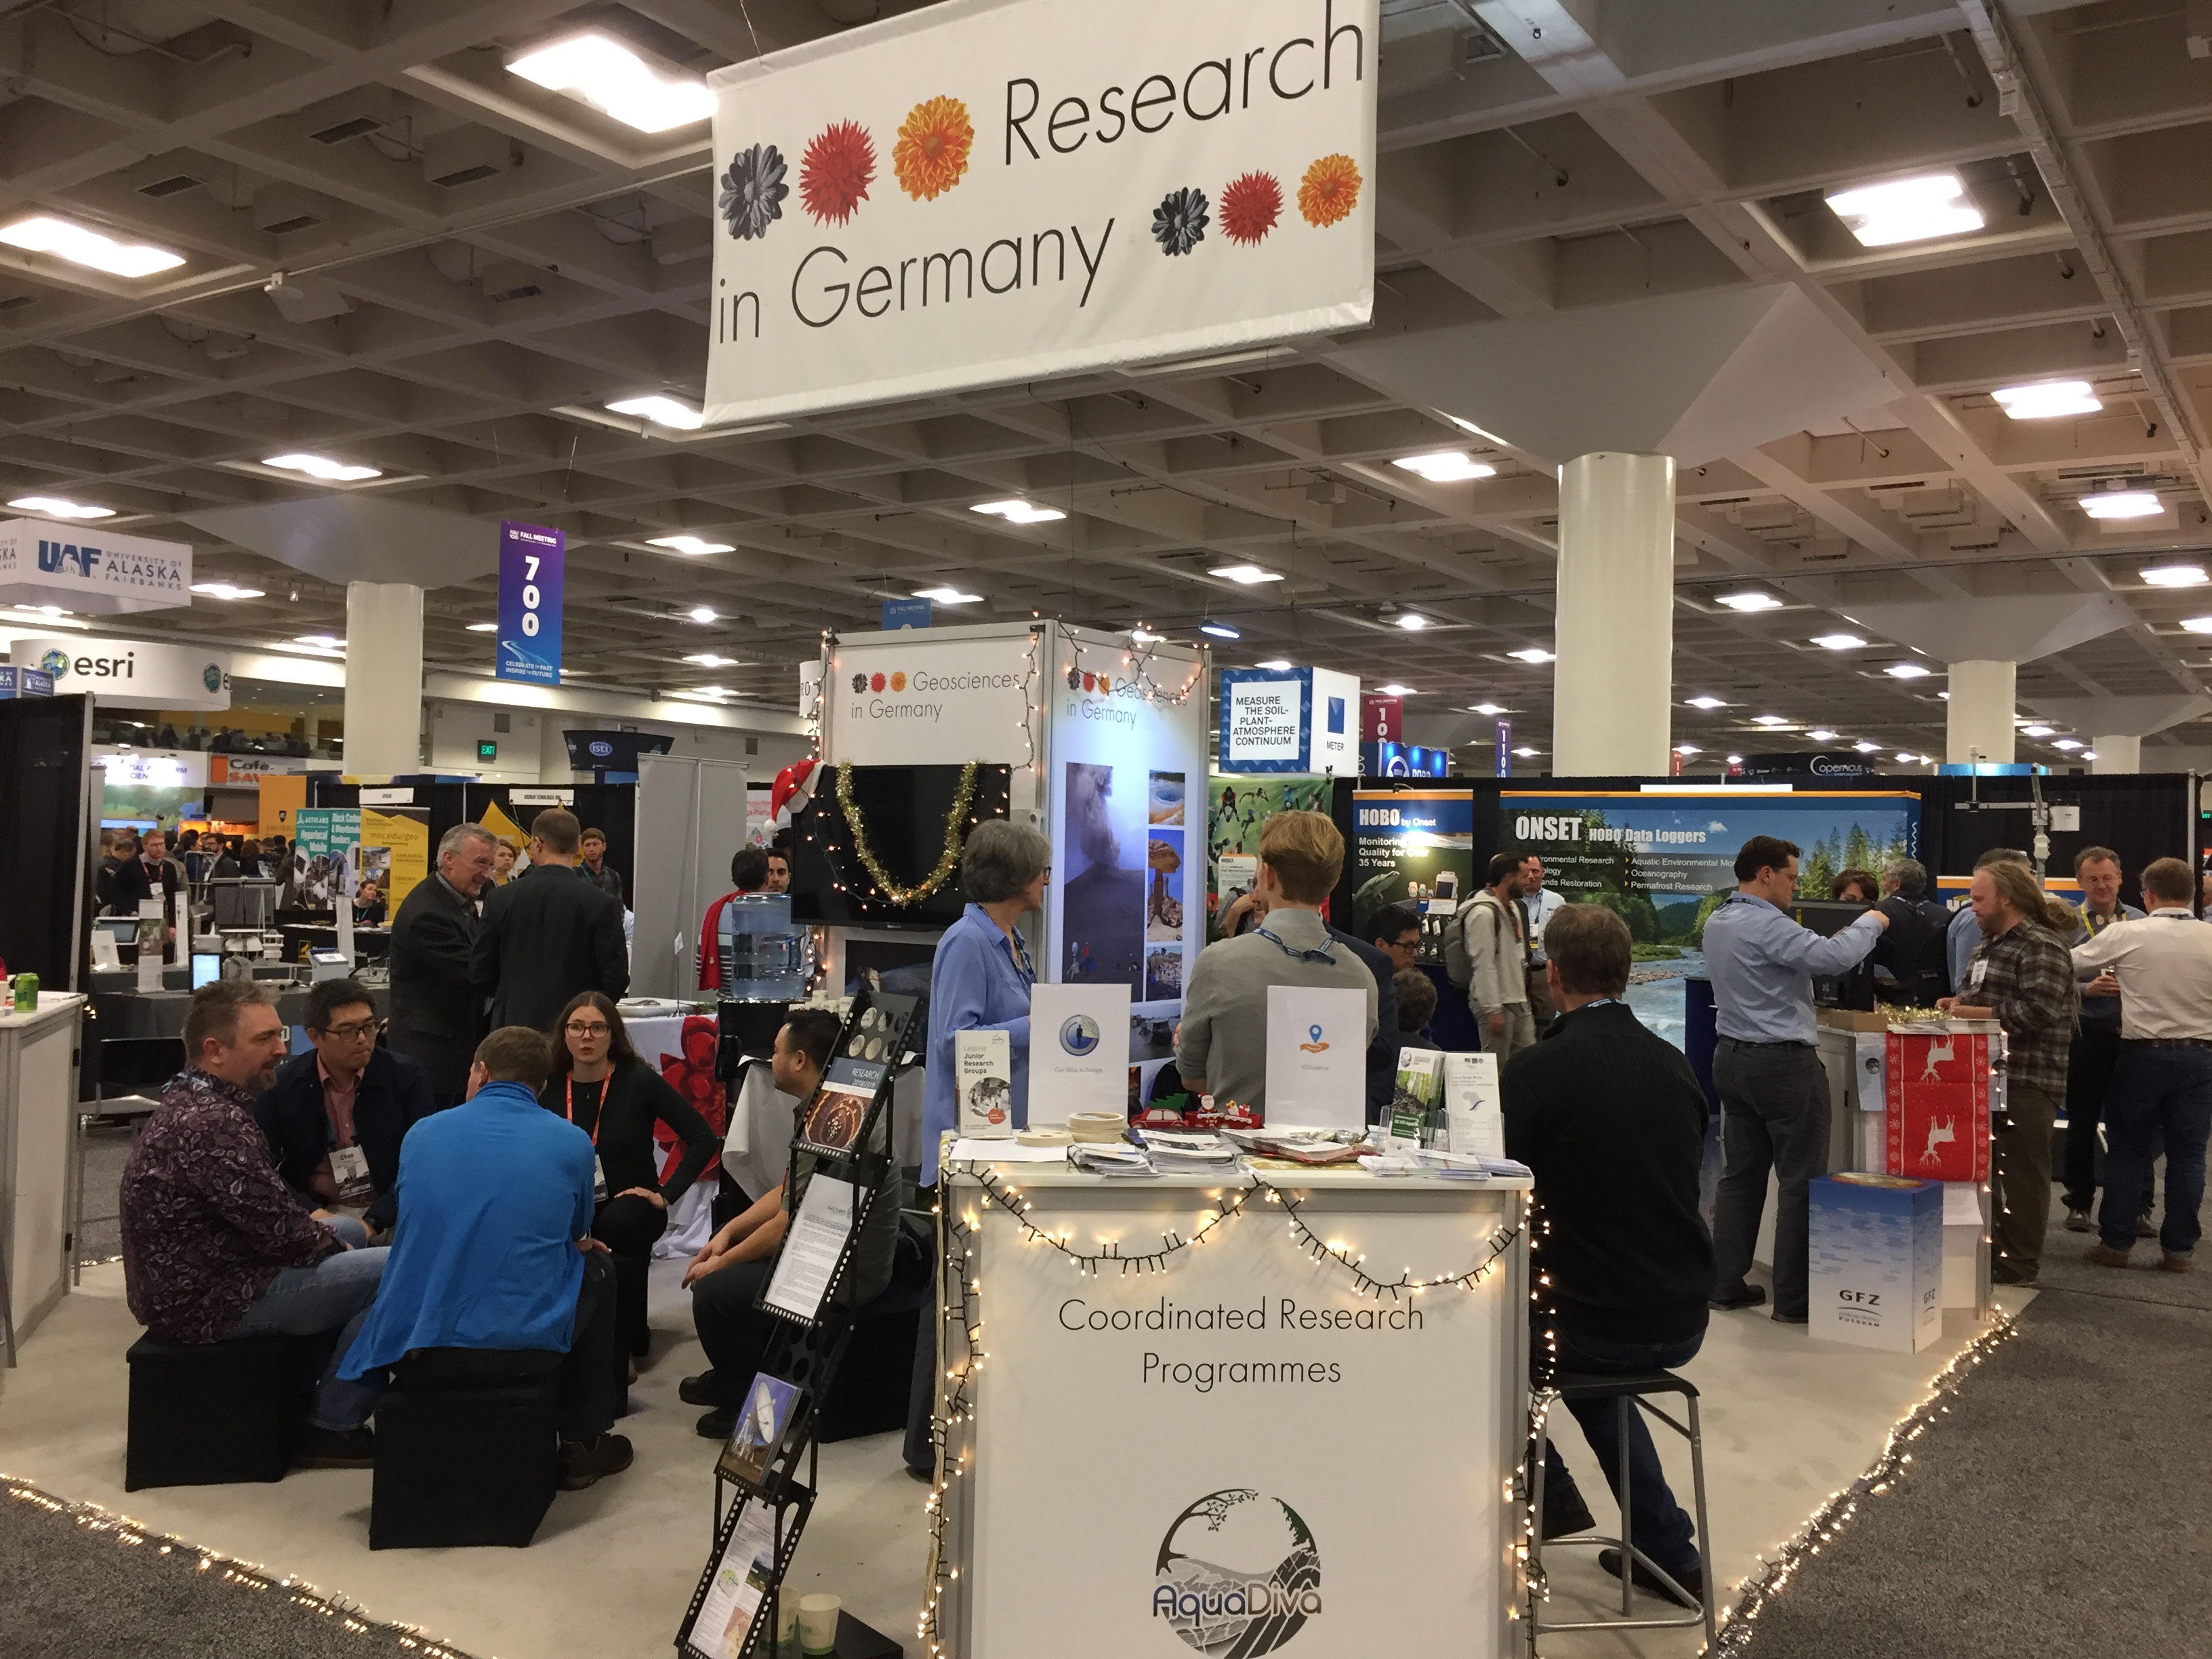 “Research in Germany” exhibition booth at the Fall Meeting of the American Geophysical Union 2019